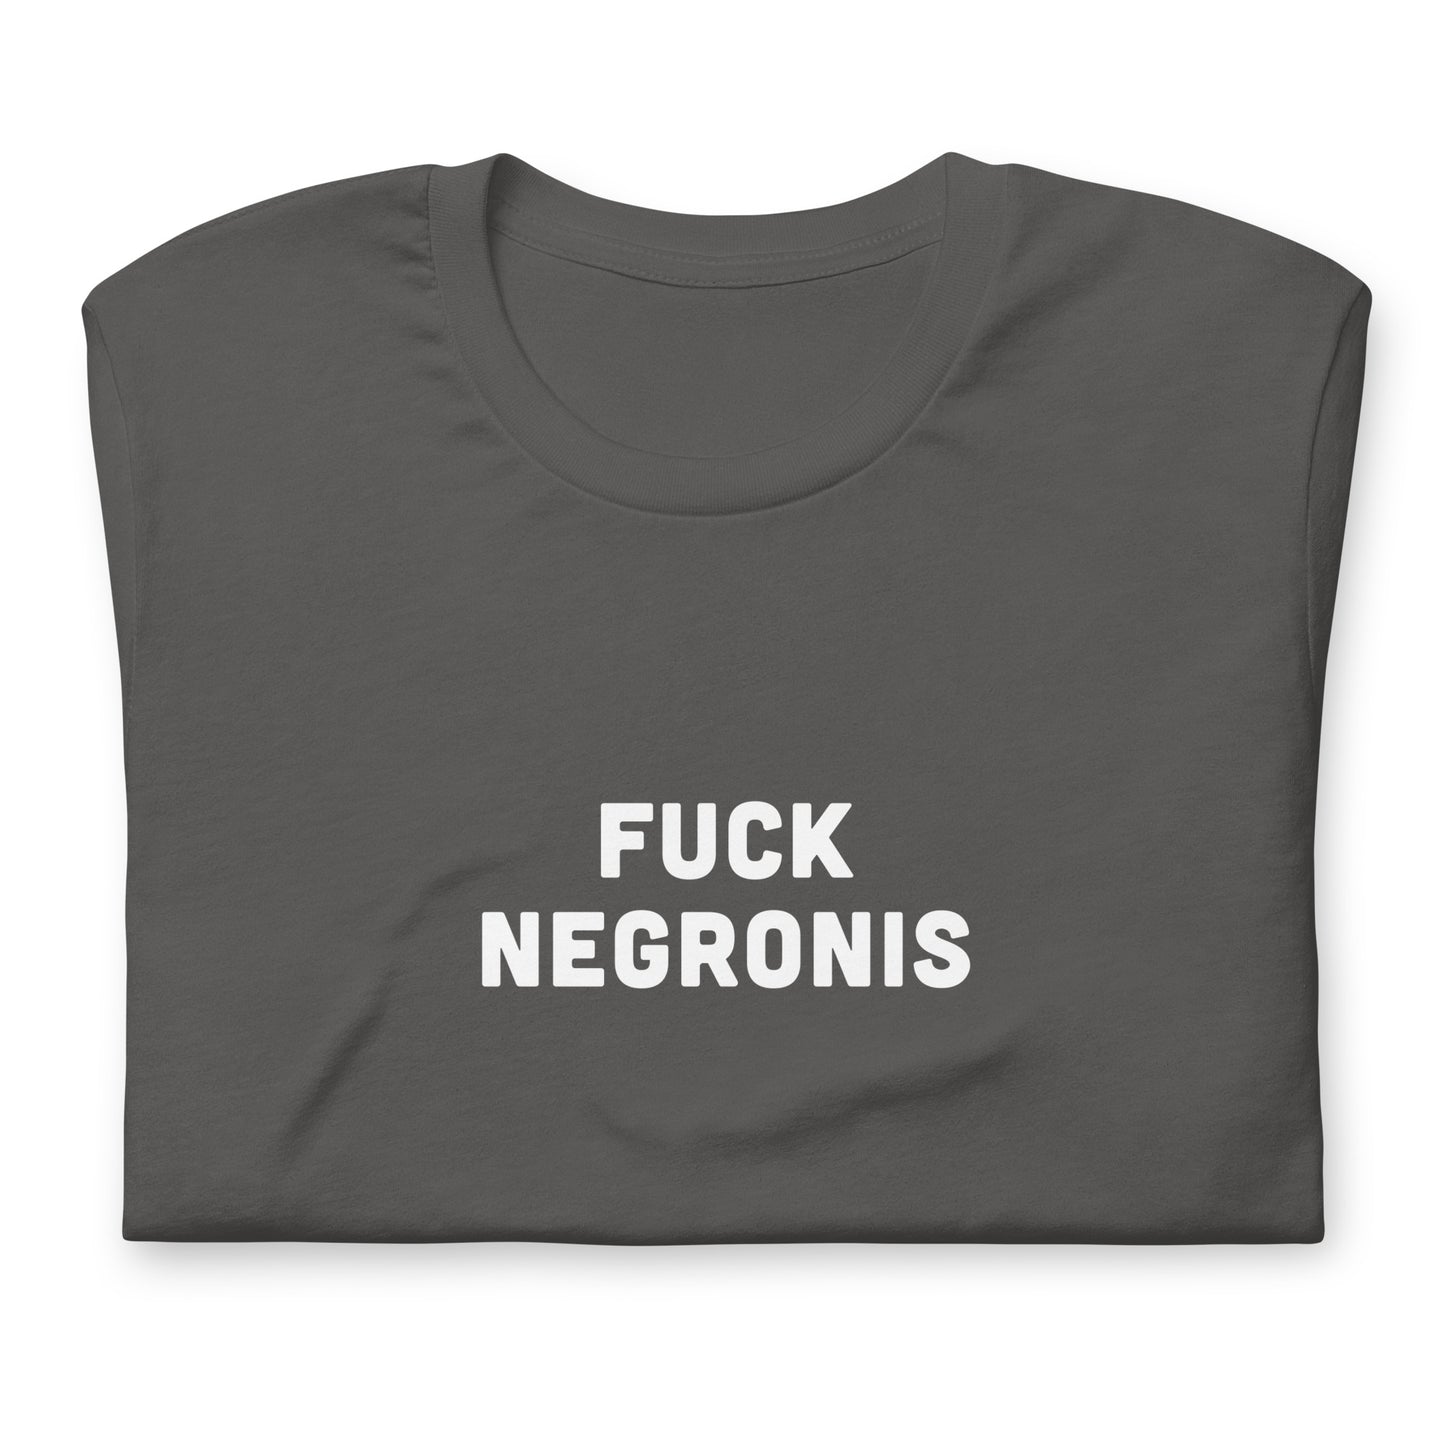 Fuck Negronis T-Shirt Size S Color Navy